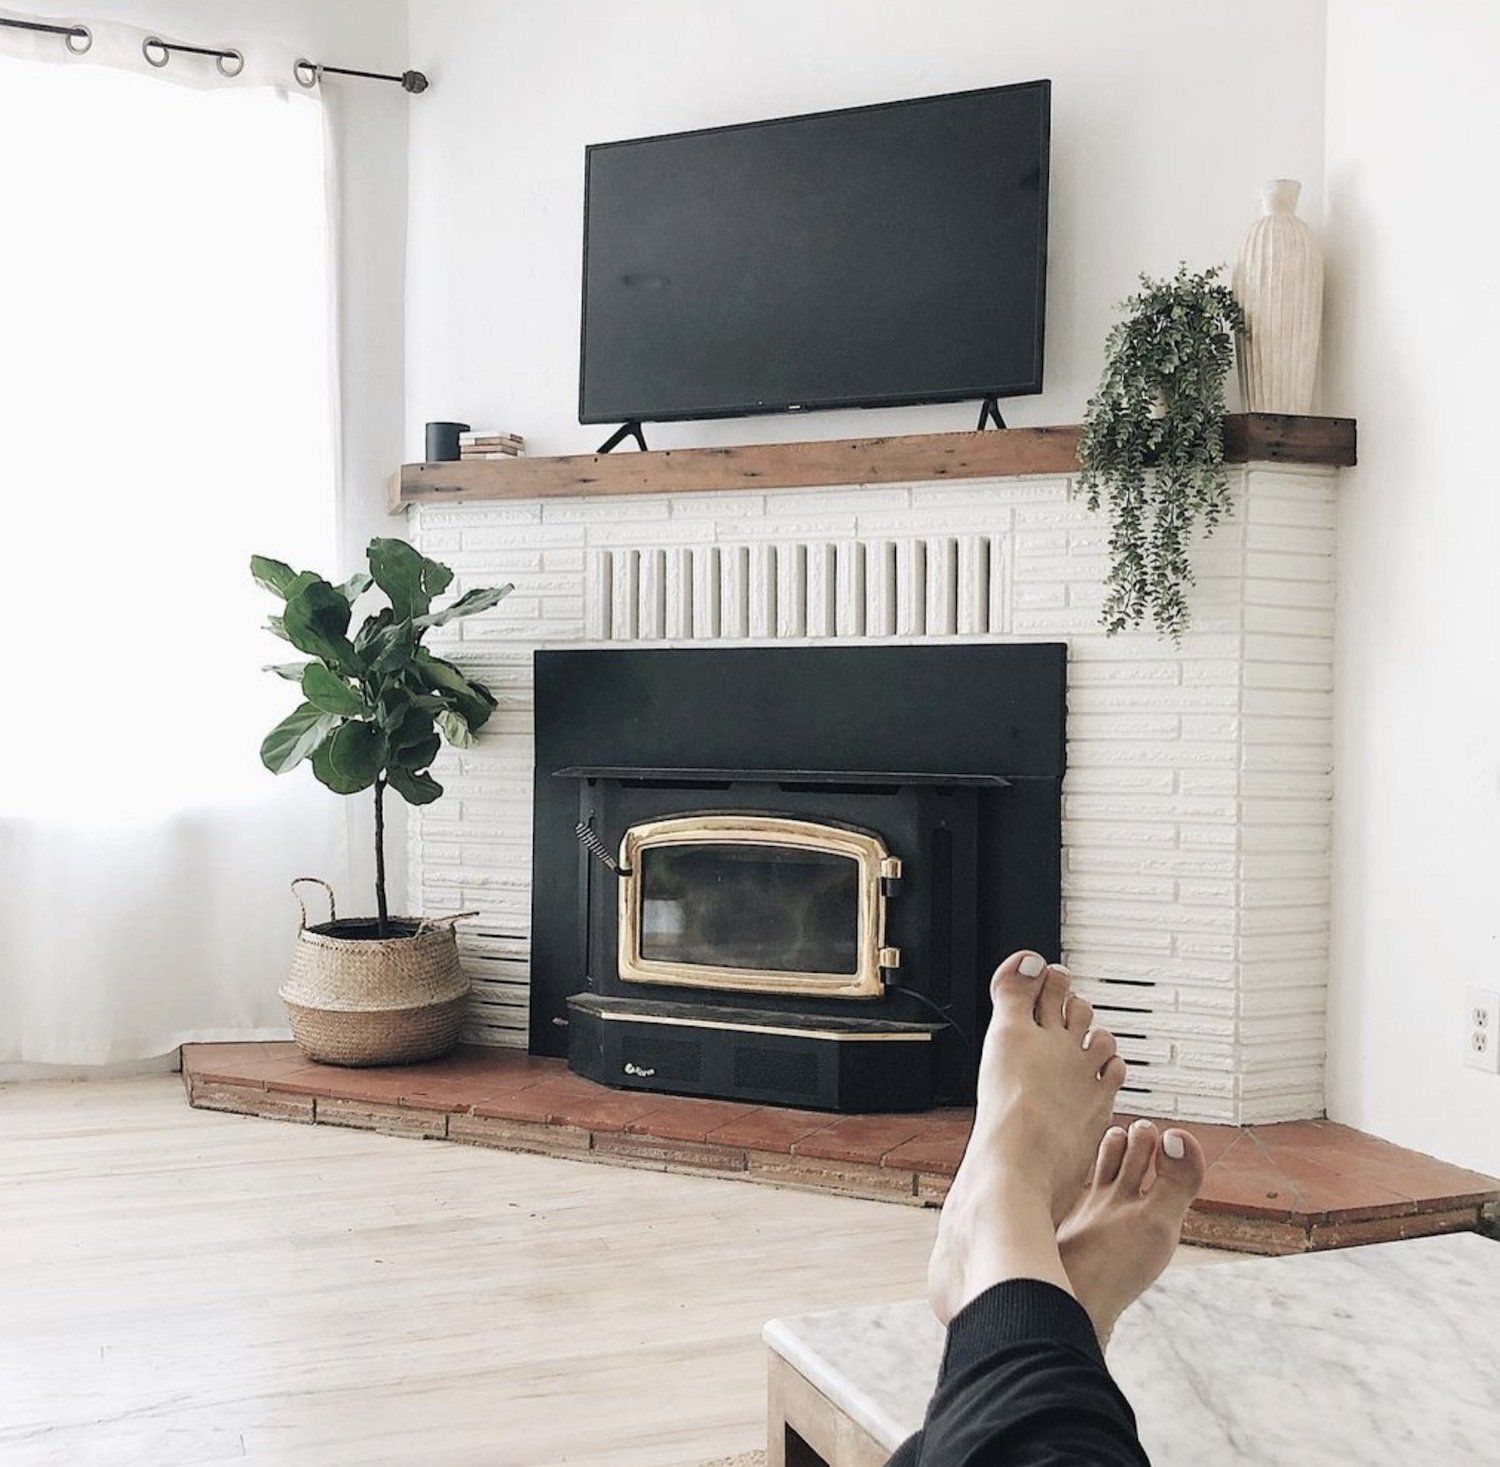 Debbie Mayes' feet rest in front of a fireplace after she shared on how to become a minimalist